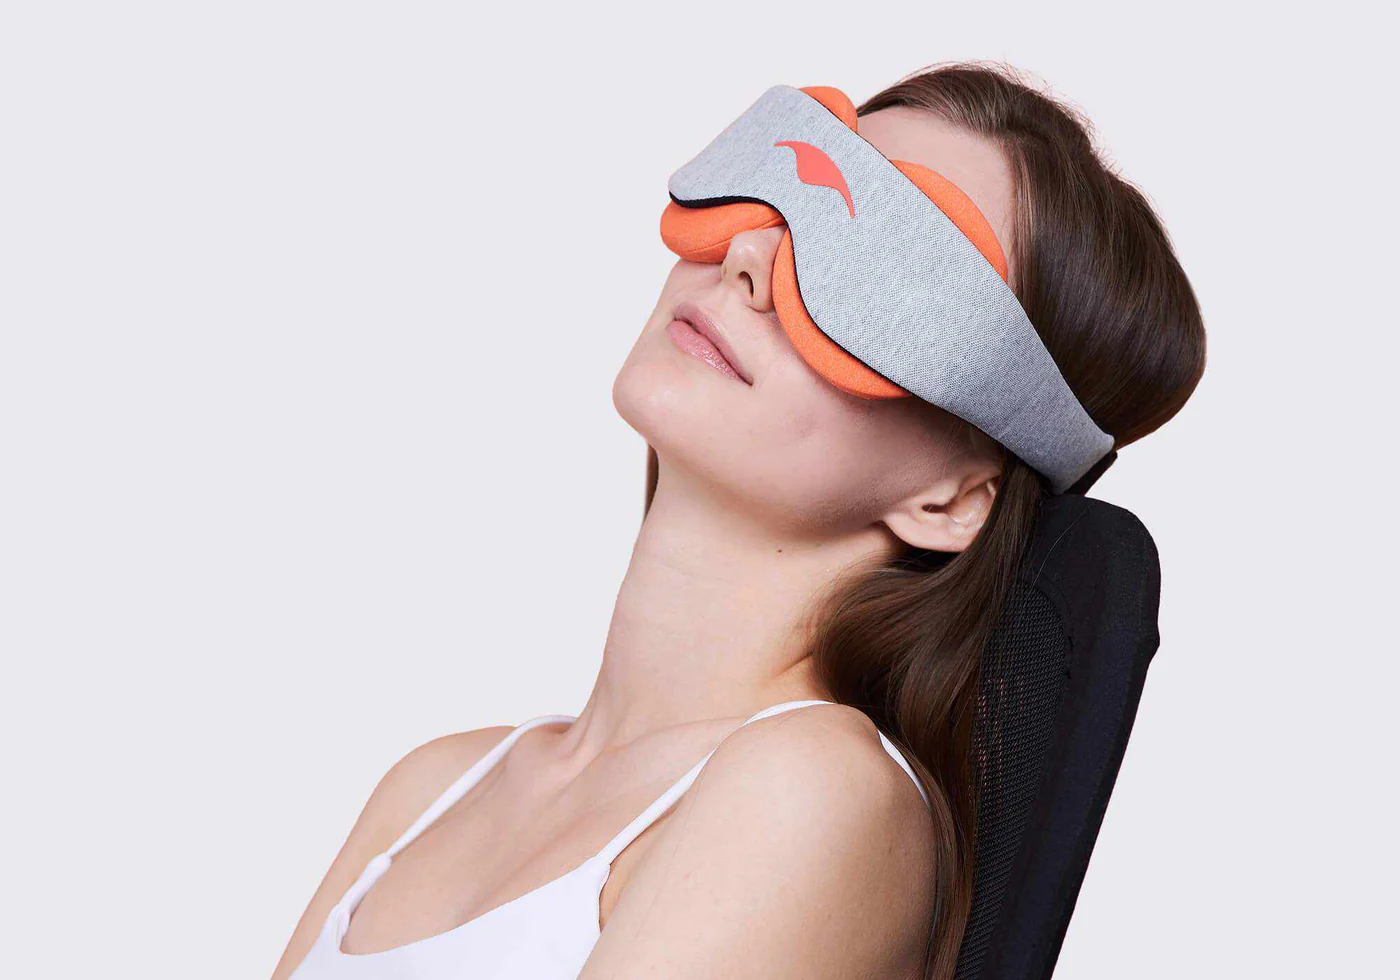 A girl leaning back against a black chair, wearing a light gray sleep mask with orange warming eye cups.